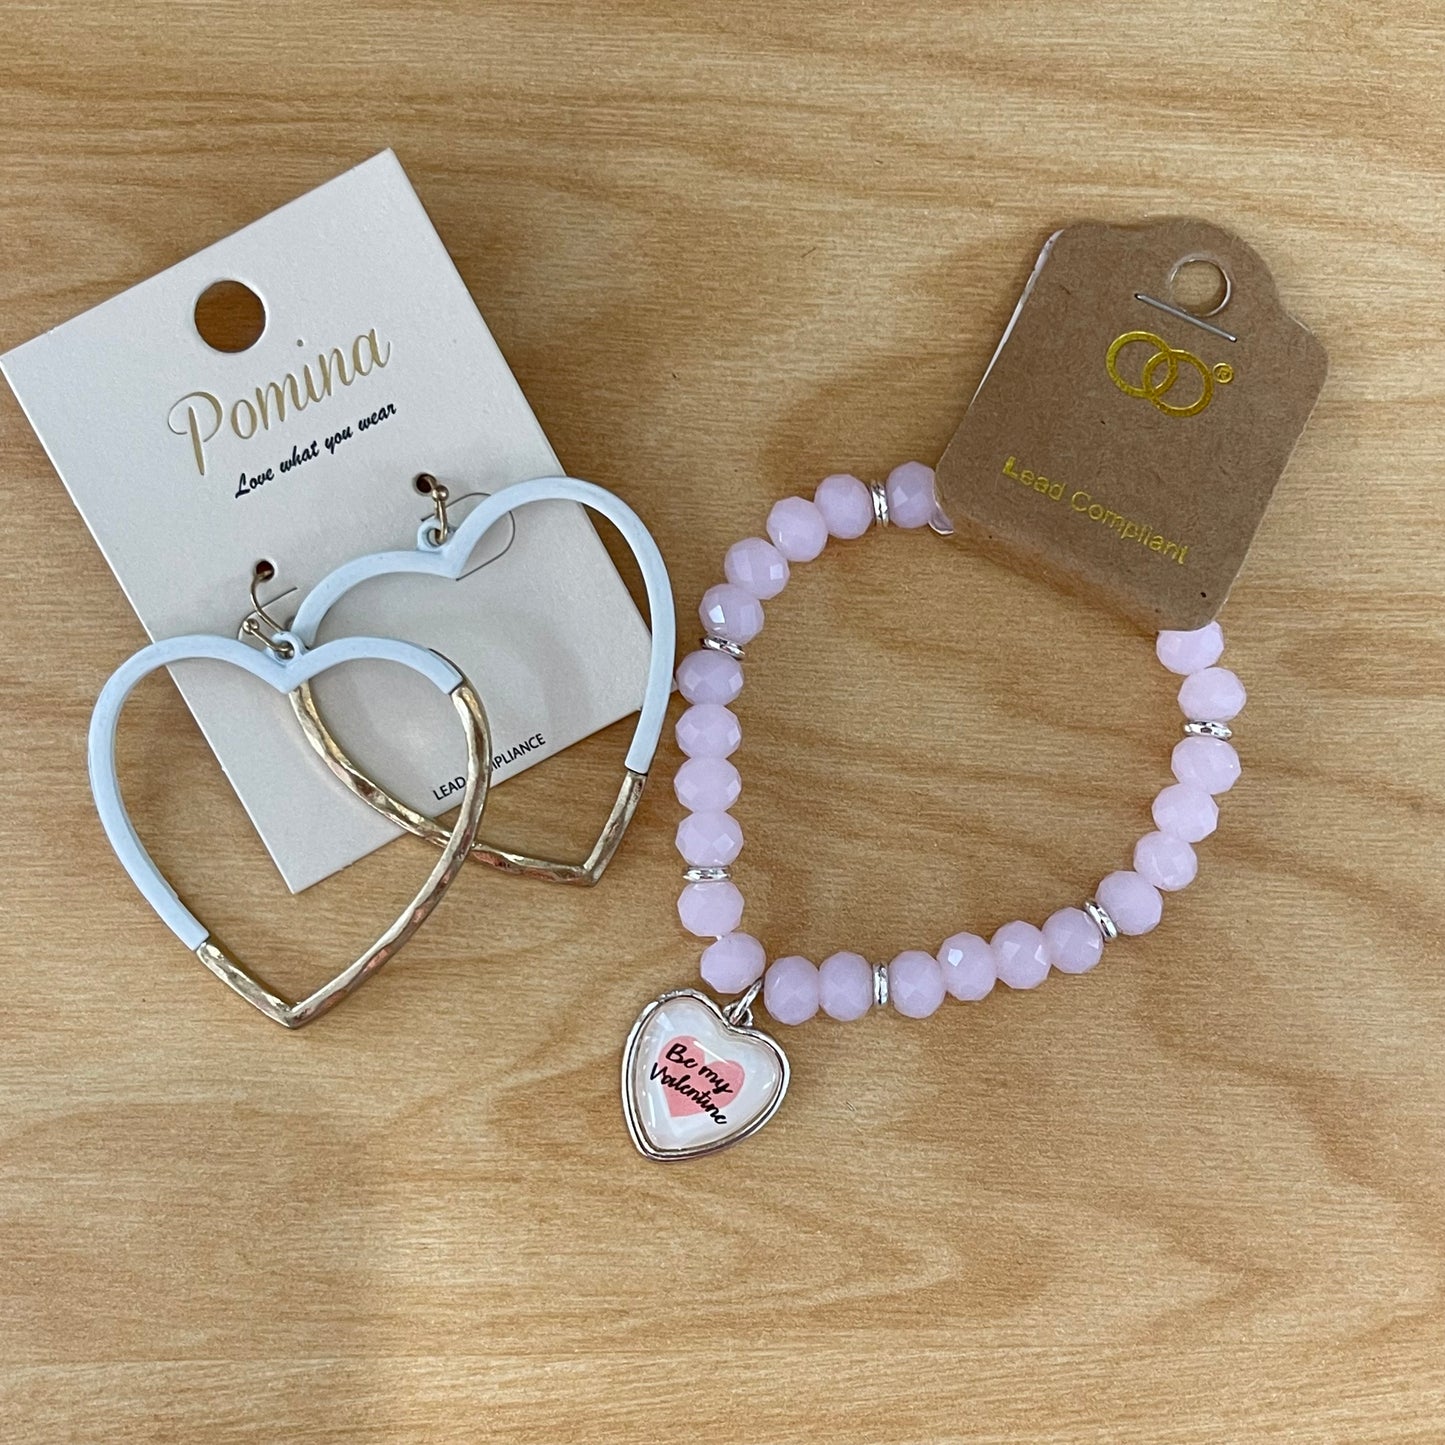 Valentine’s Day: White And Gold Dangle Heart Earrings or “Be Mine” Bracelet